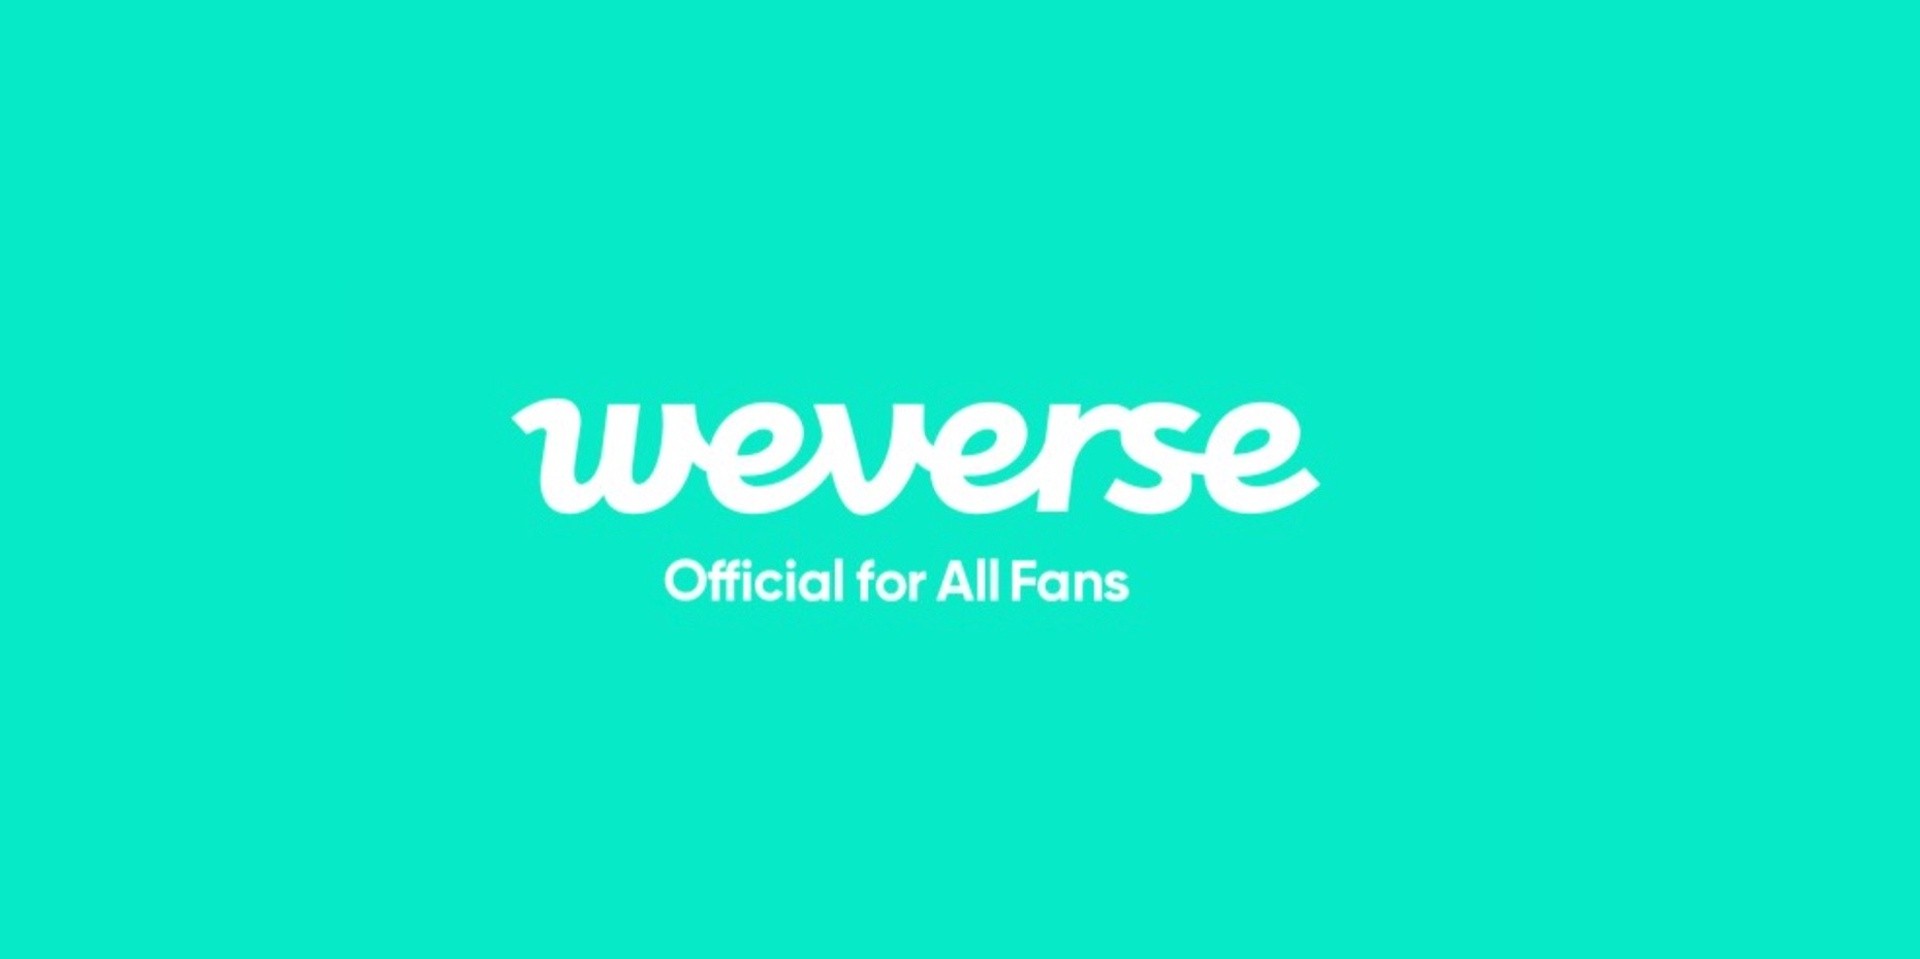 Weverse to launch new subscription chat service 'Weverse DM,’ first artist to be revealed this week